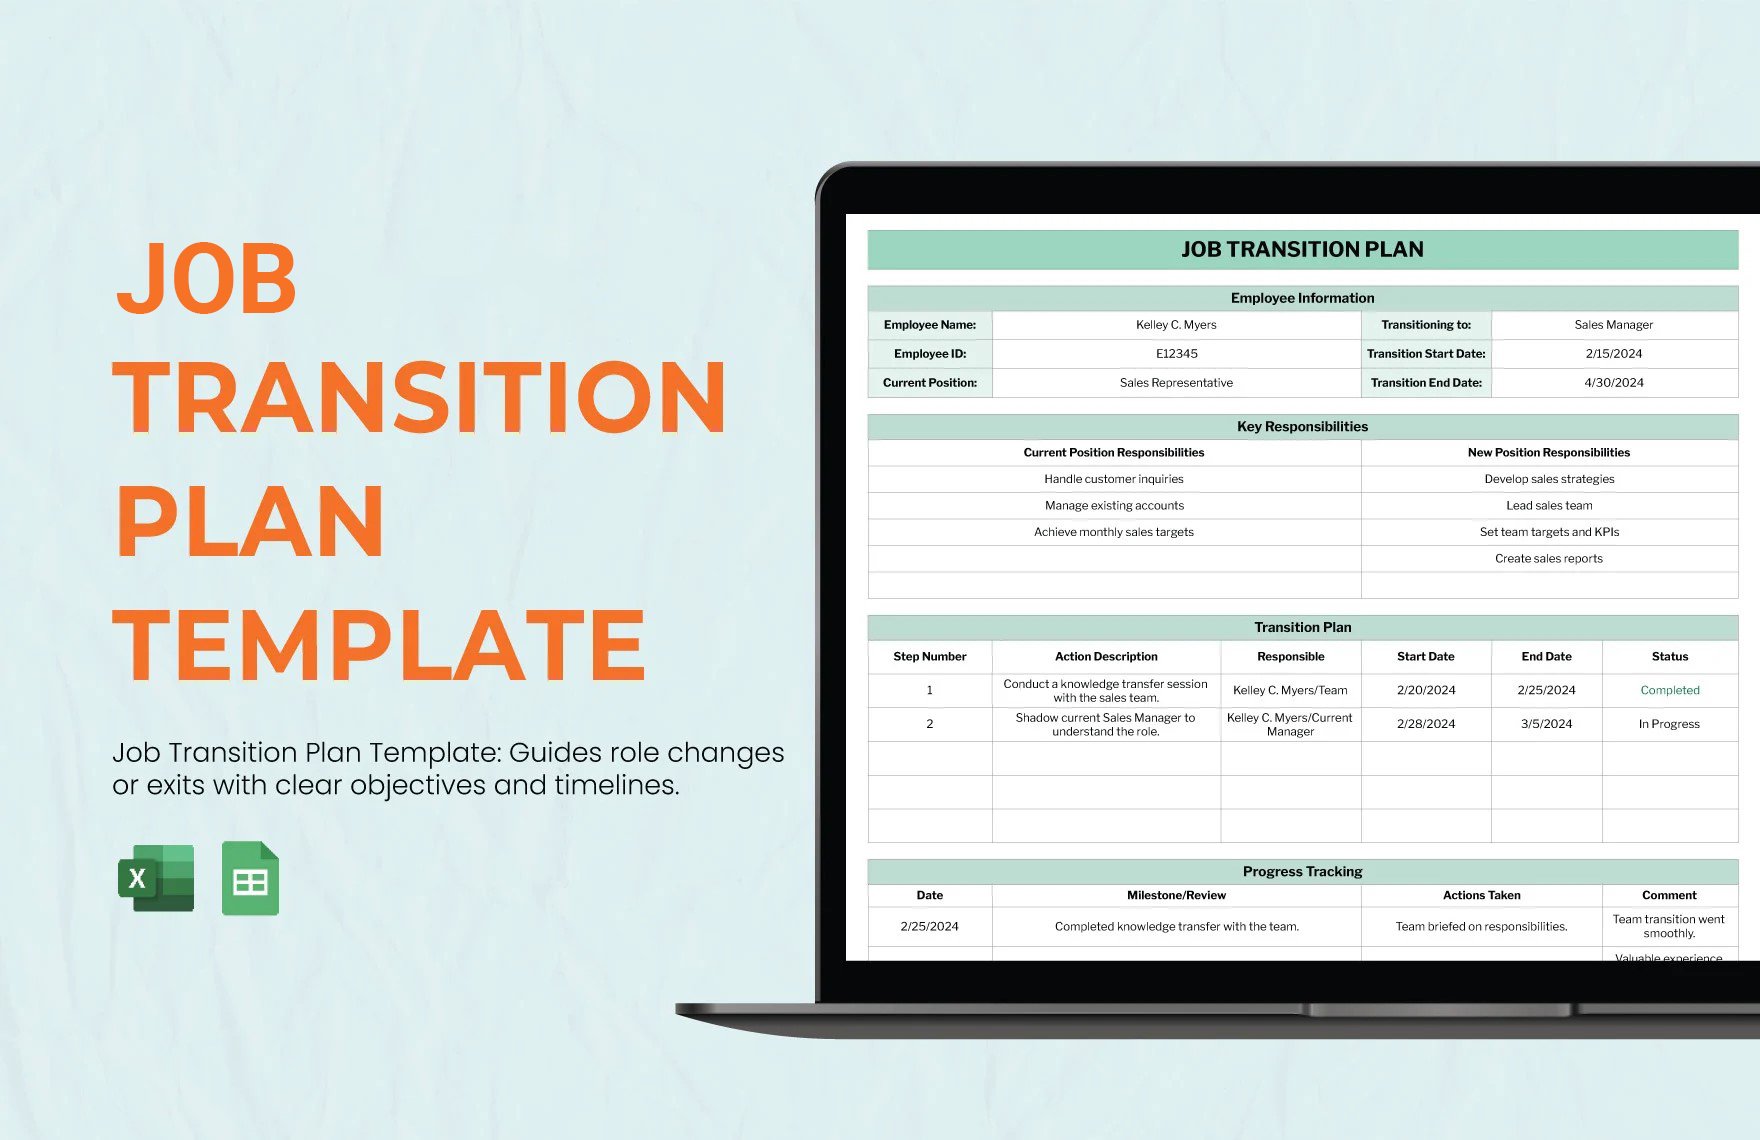 Job Transition Plan Template in Excel, Google Sheets